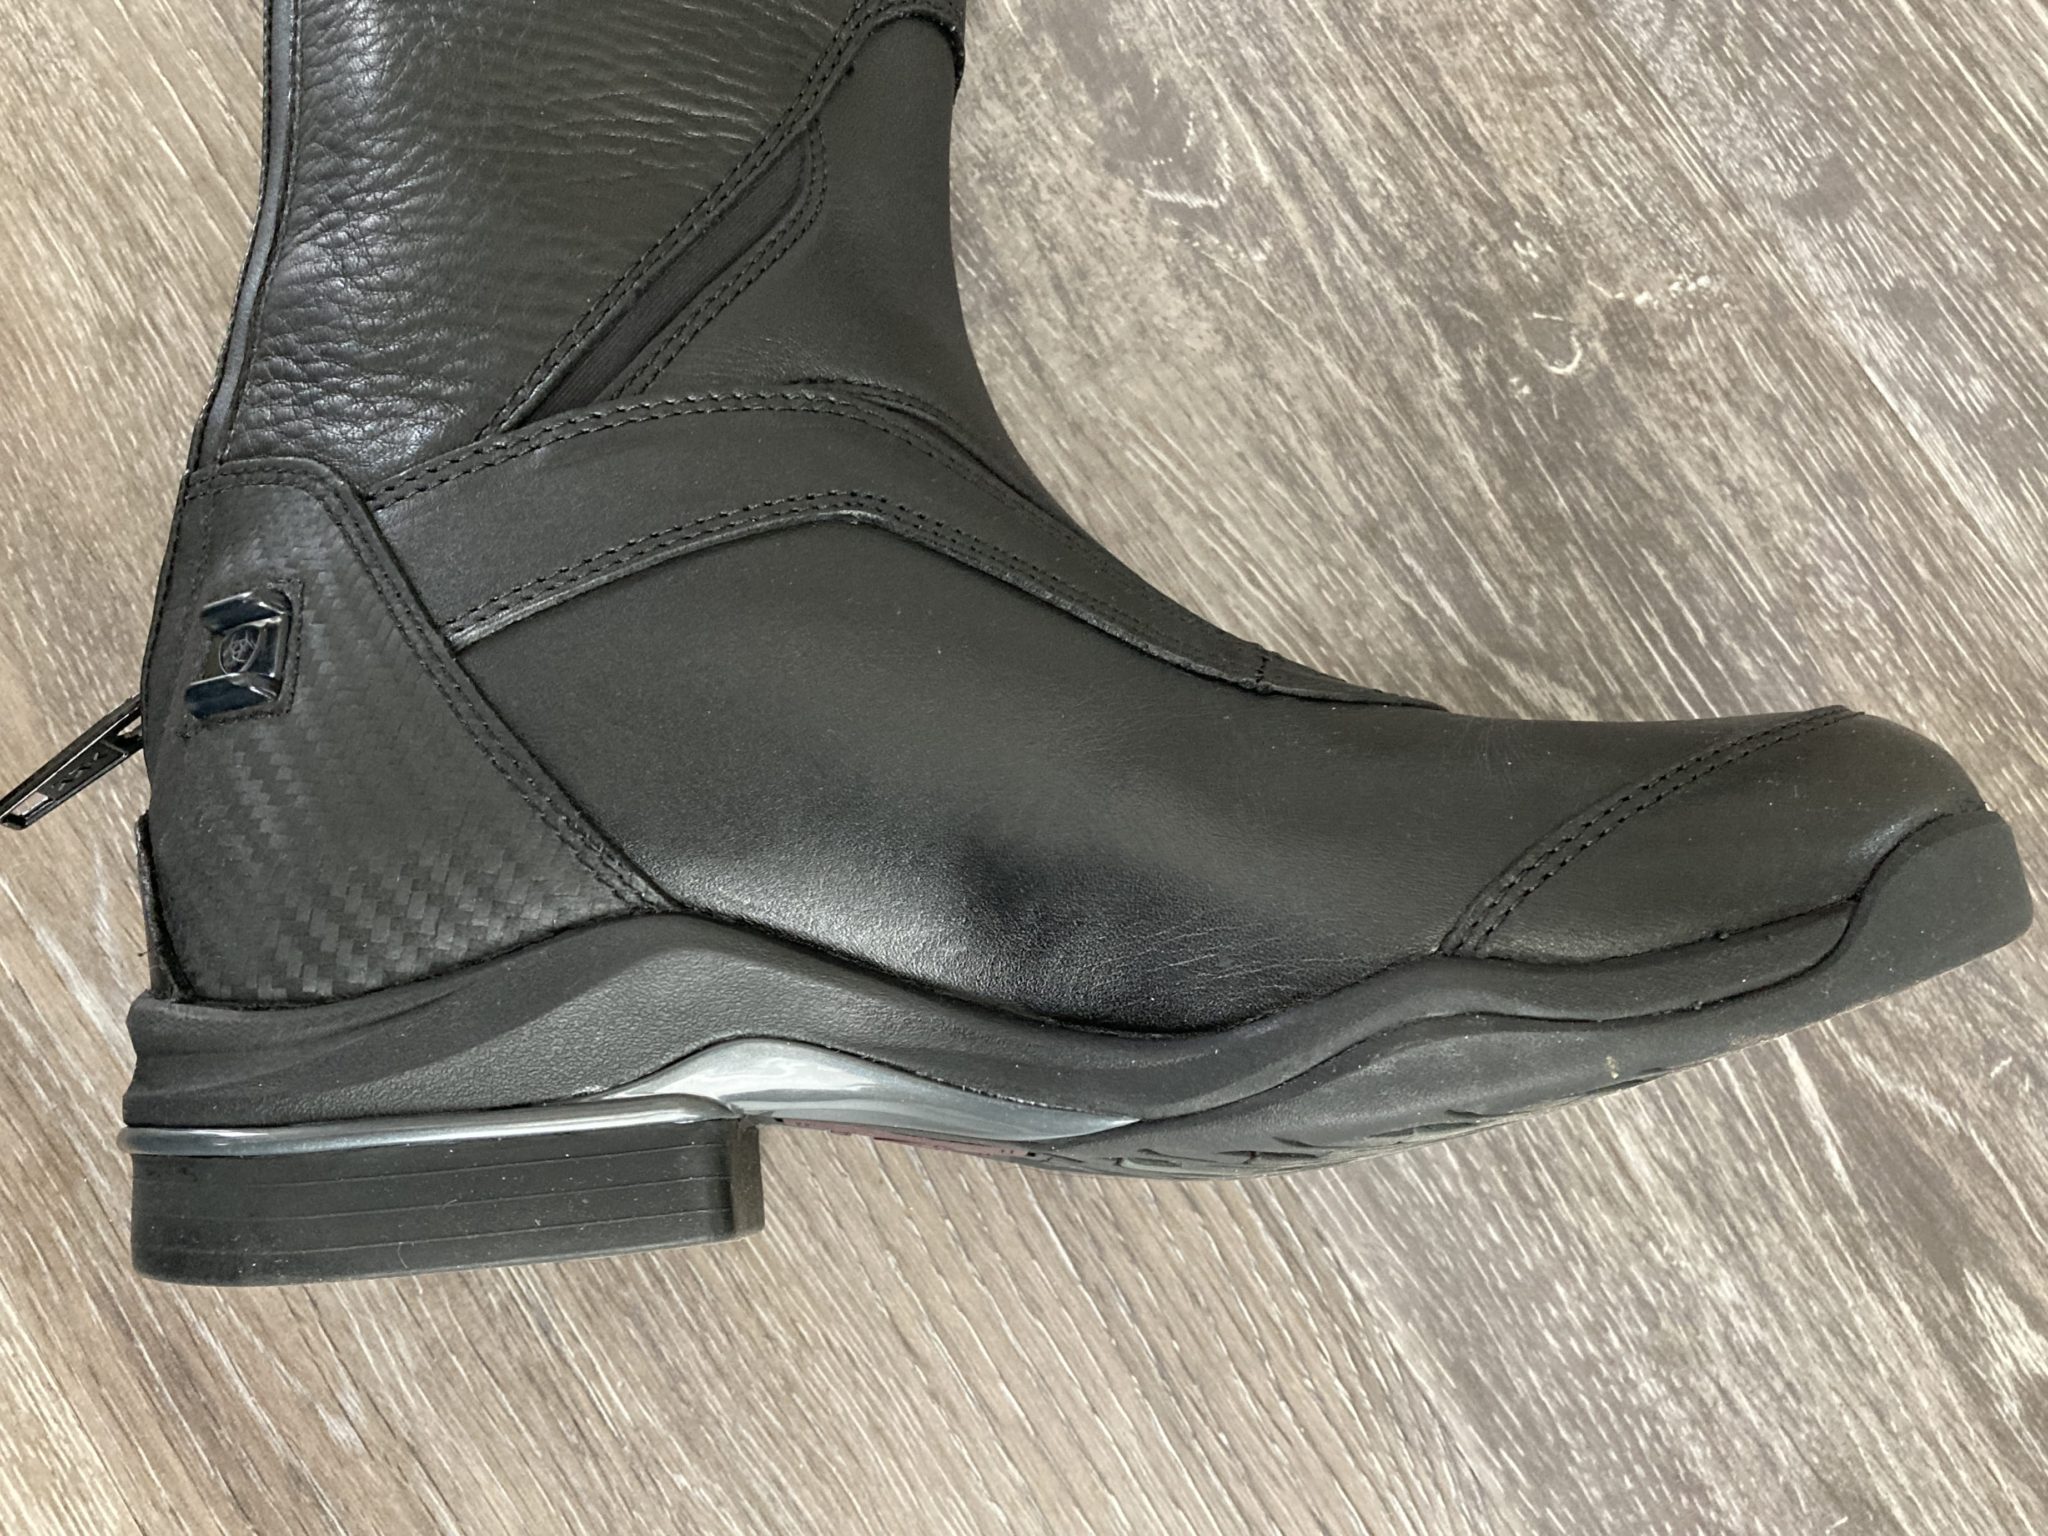 Sporty Meets Sleek (Ariat V Sport Boots Review)